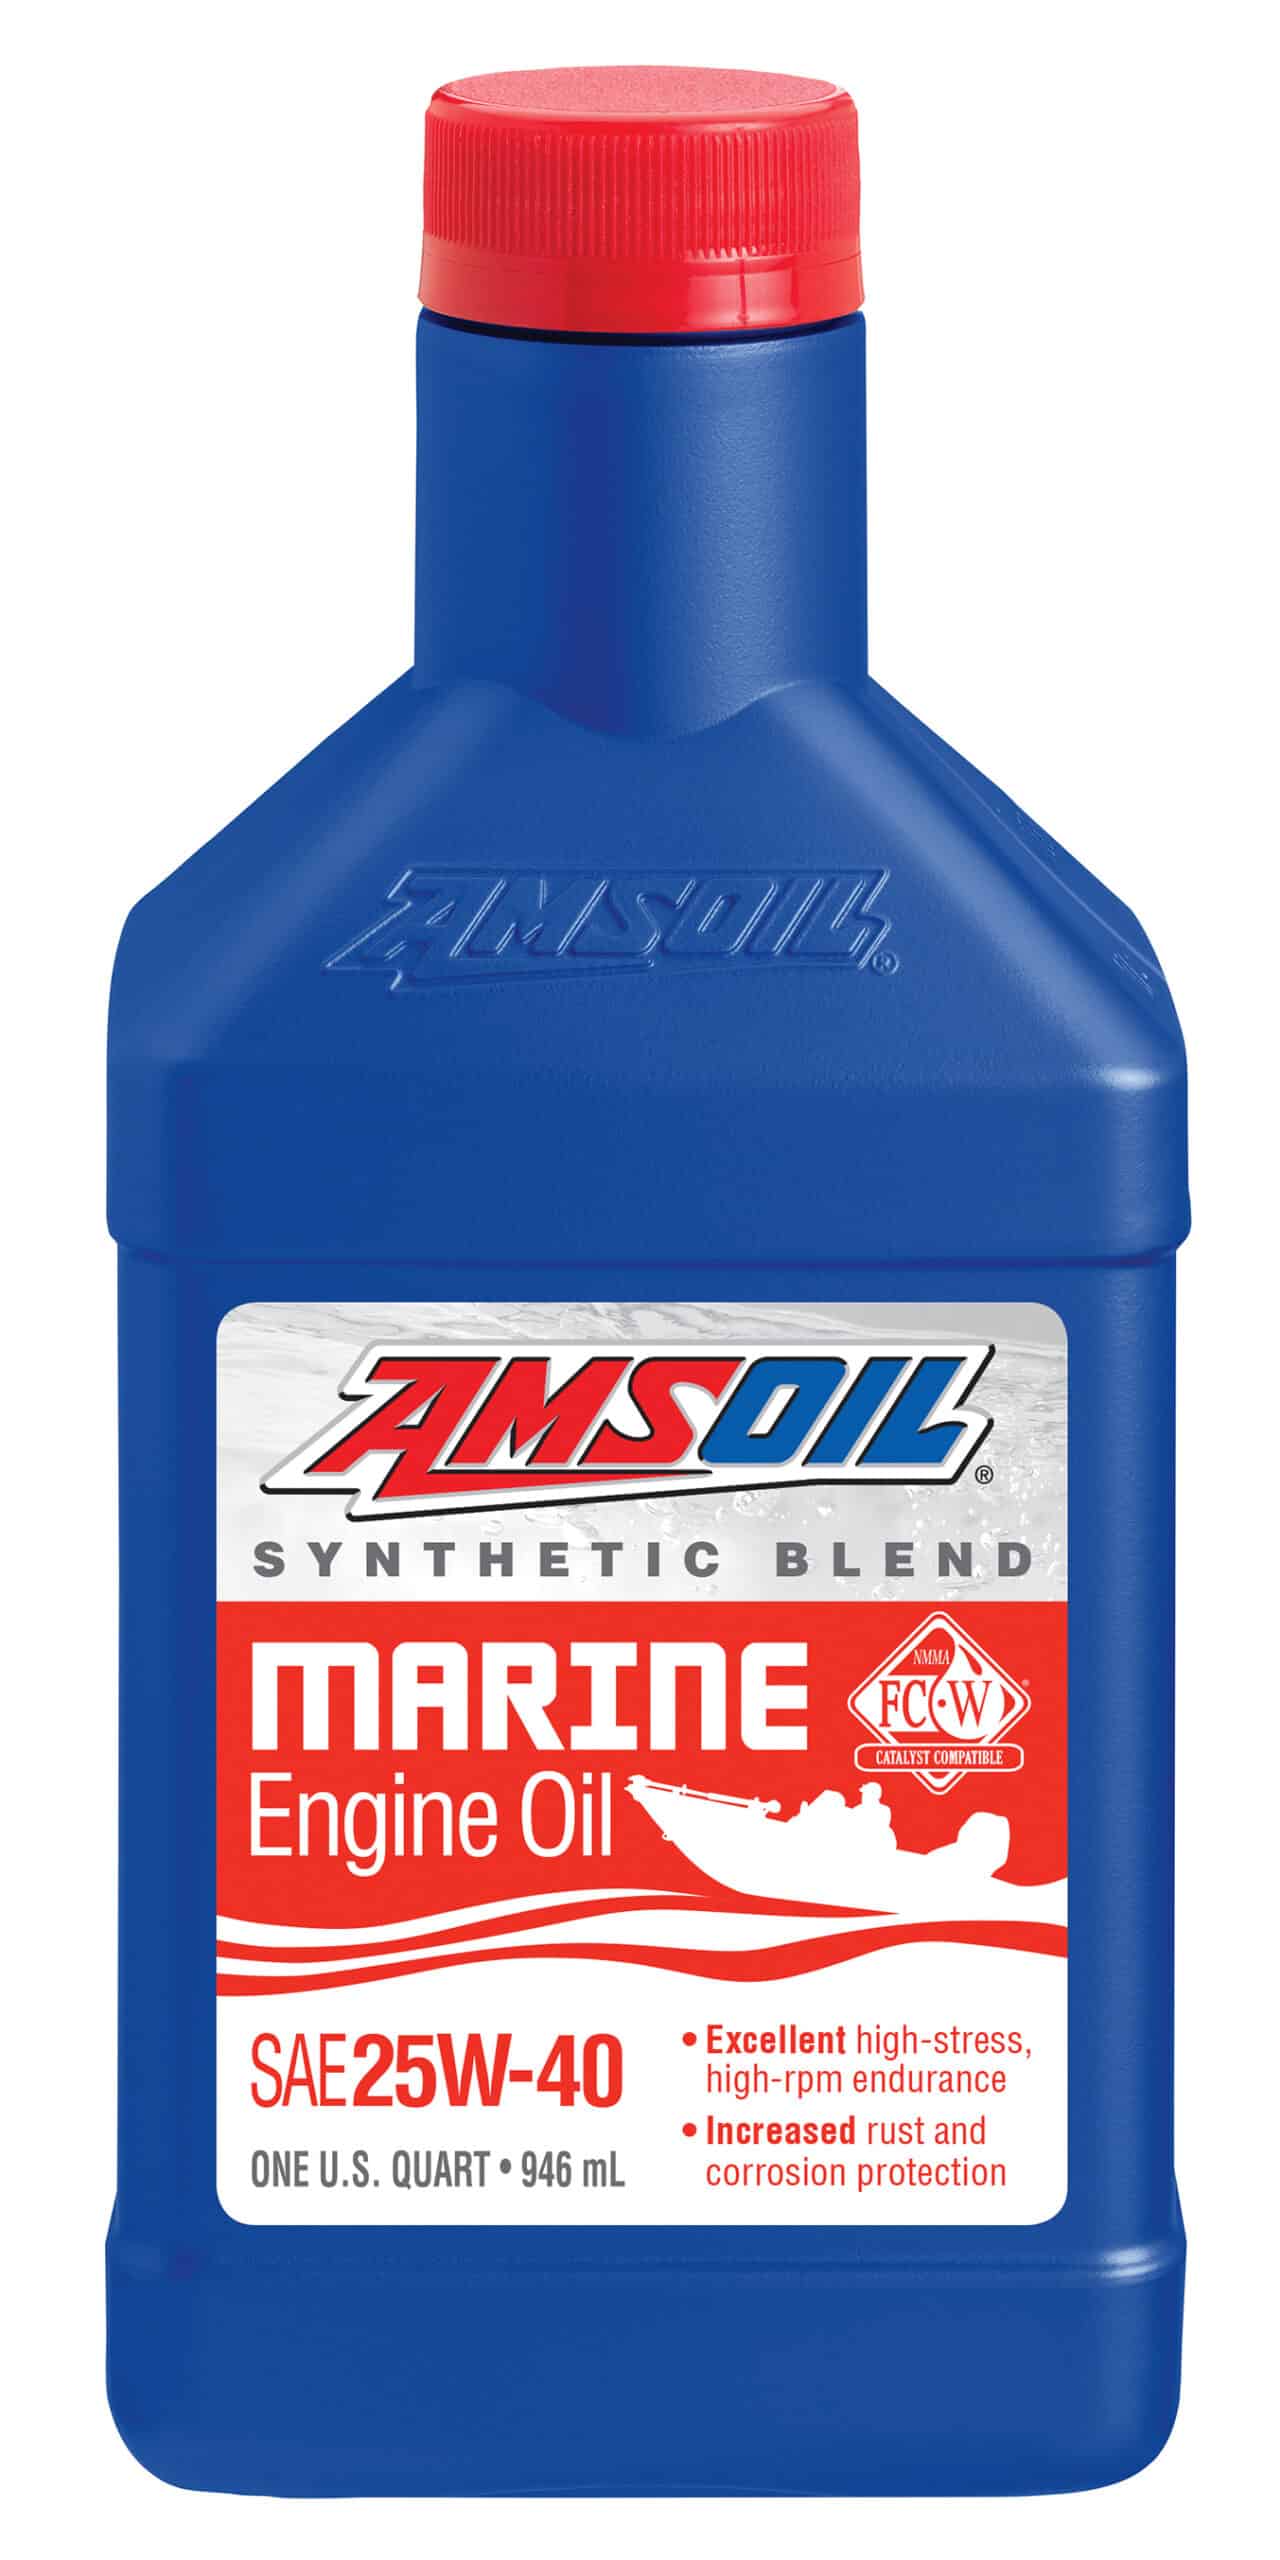 25W-40 Synthetic Blend Marine Engine Oil